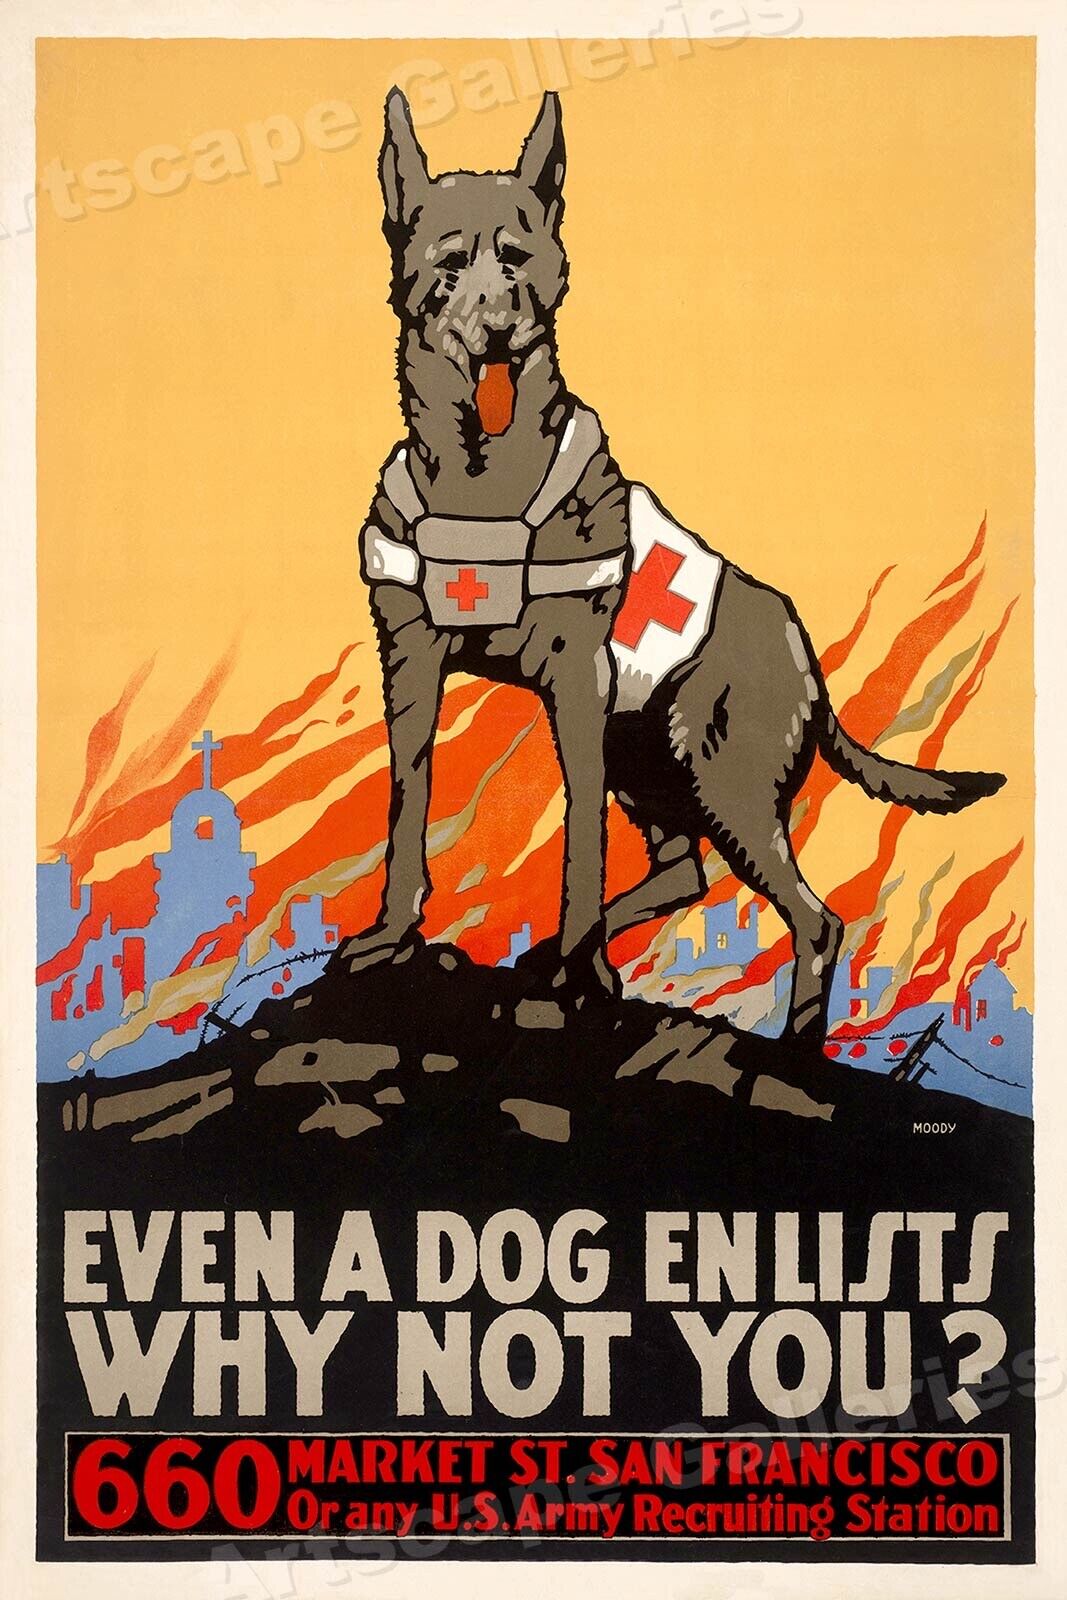 1915 “Even A Dog Enlists” Vintage Style Canine WWI War Poster - 20x30